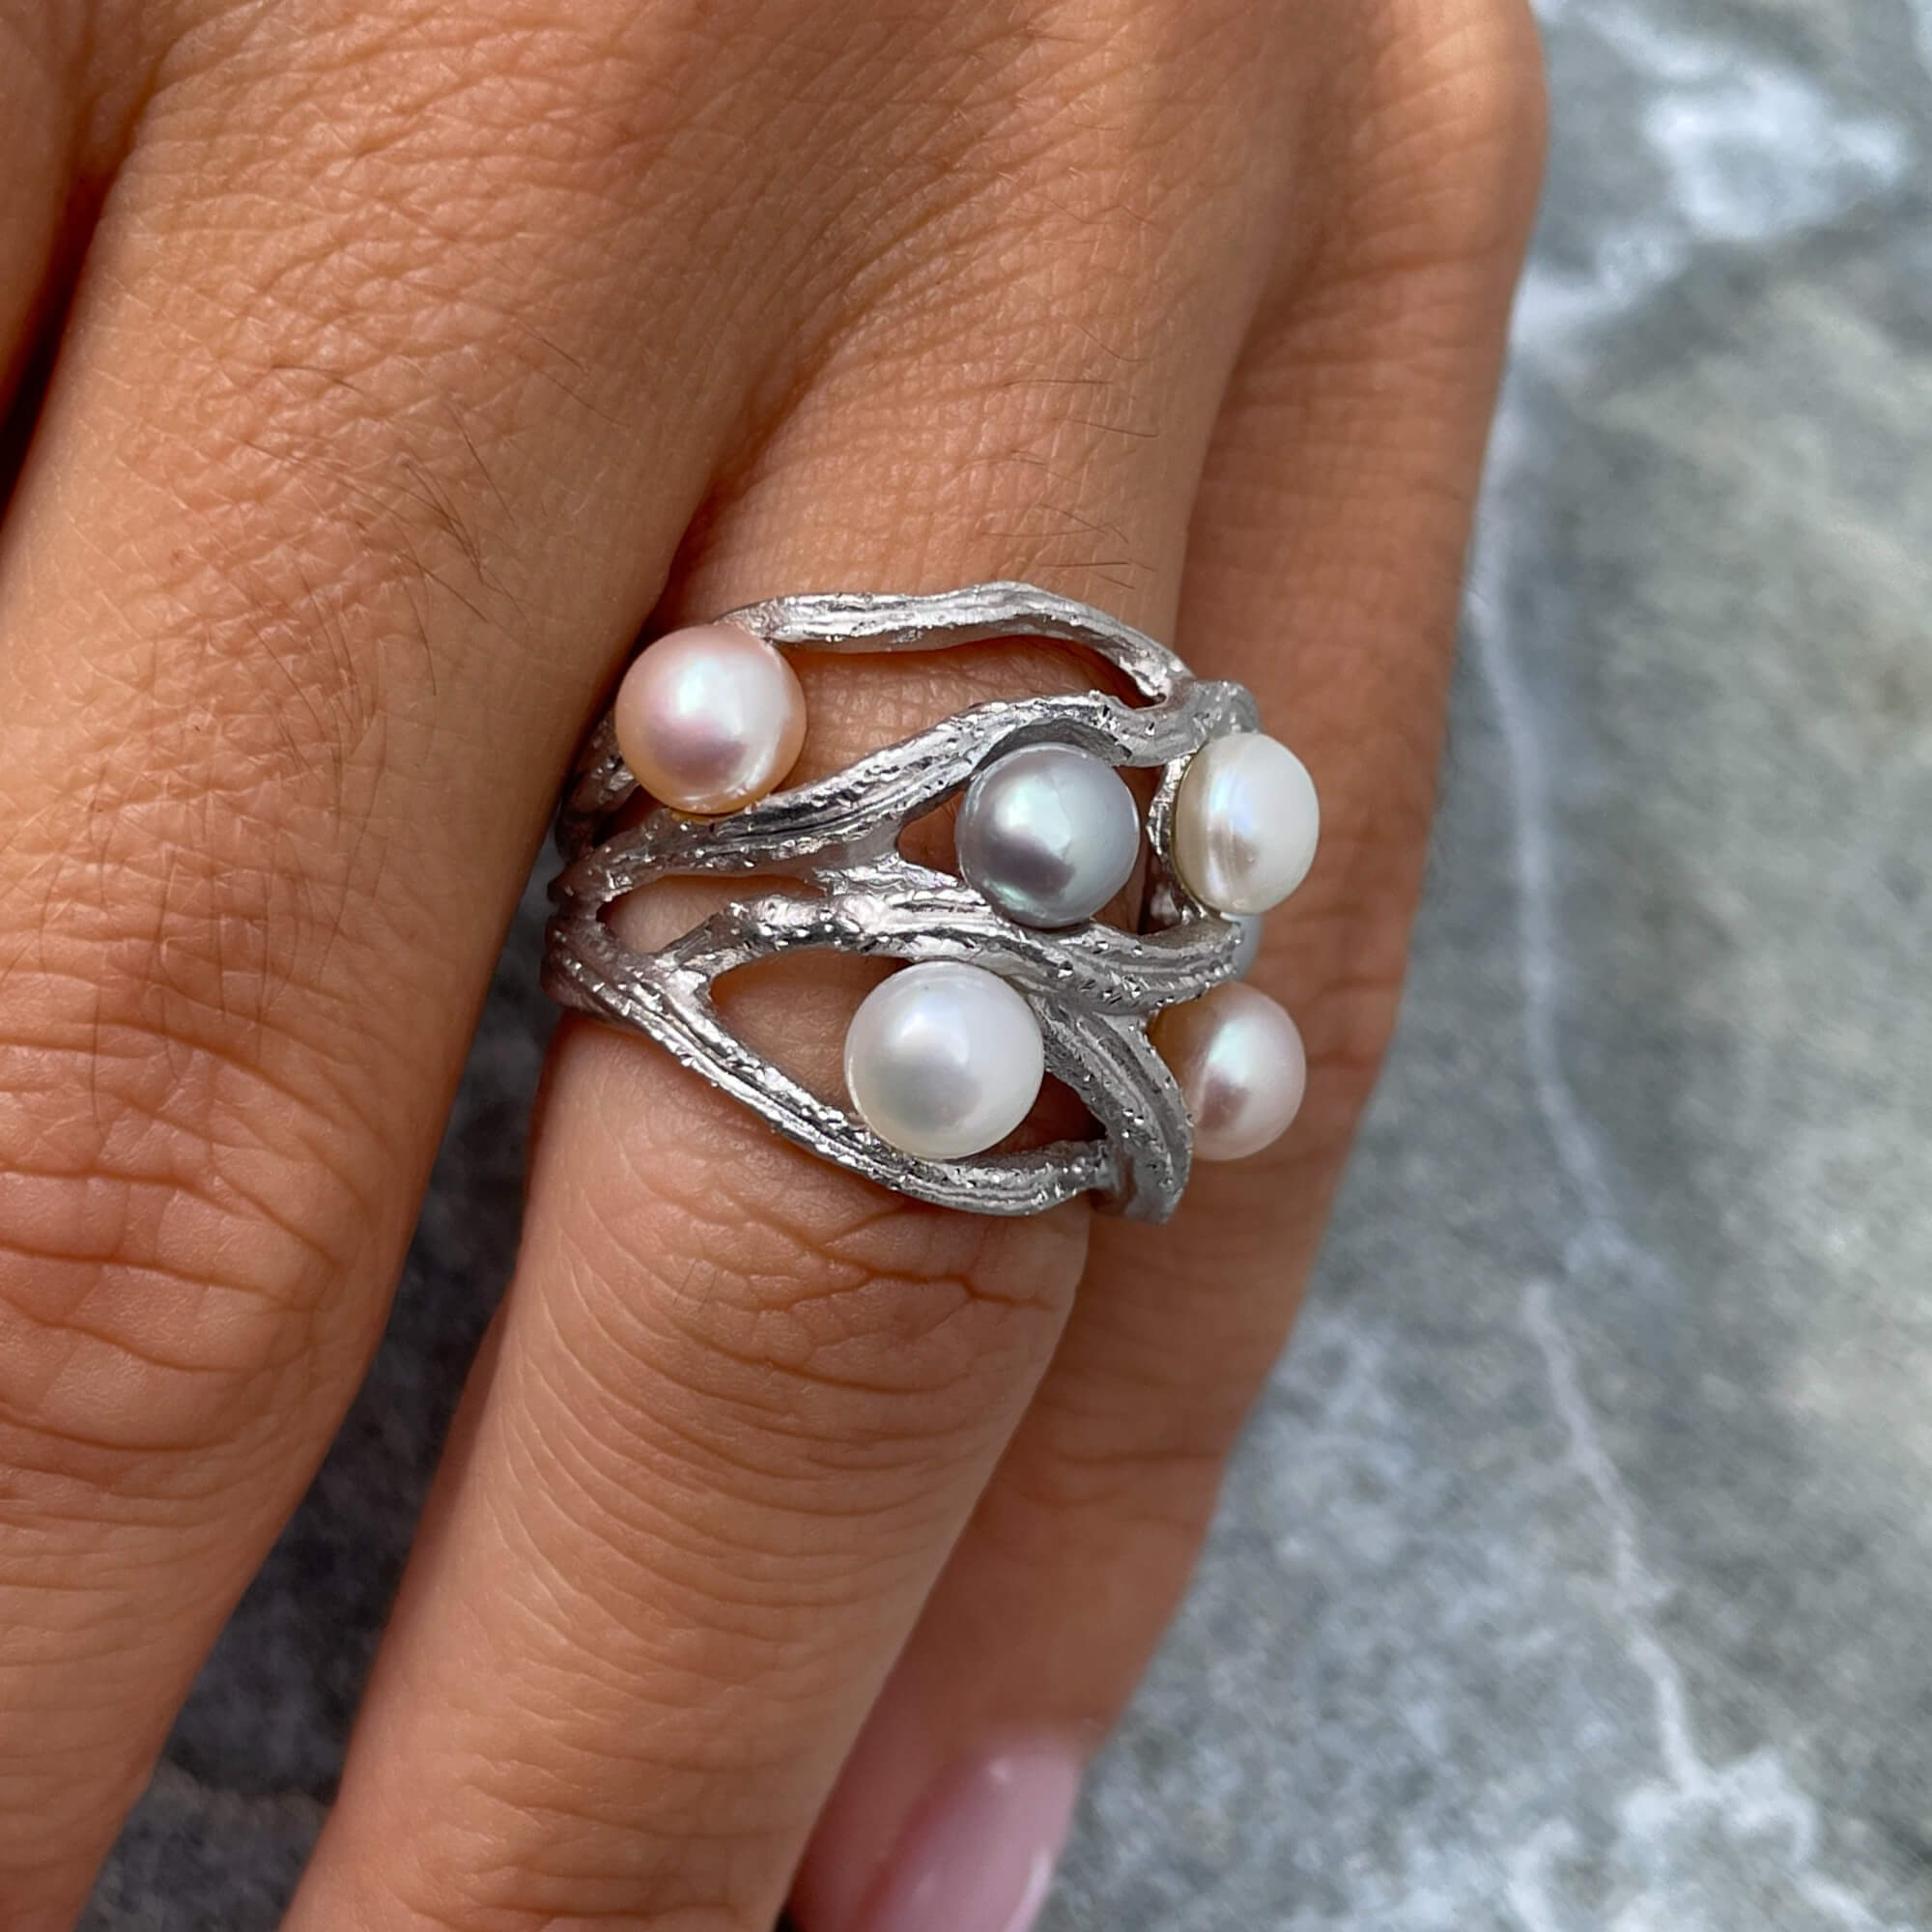 Magnificent Diamanted Silver Ring with freshwater pearls